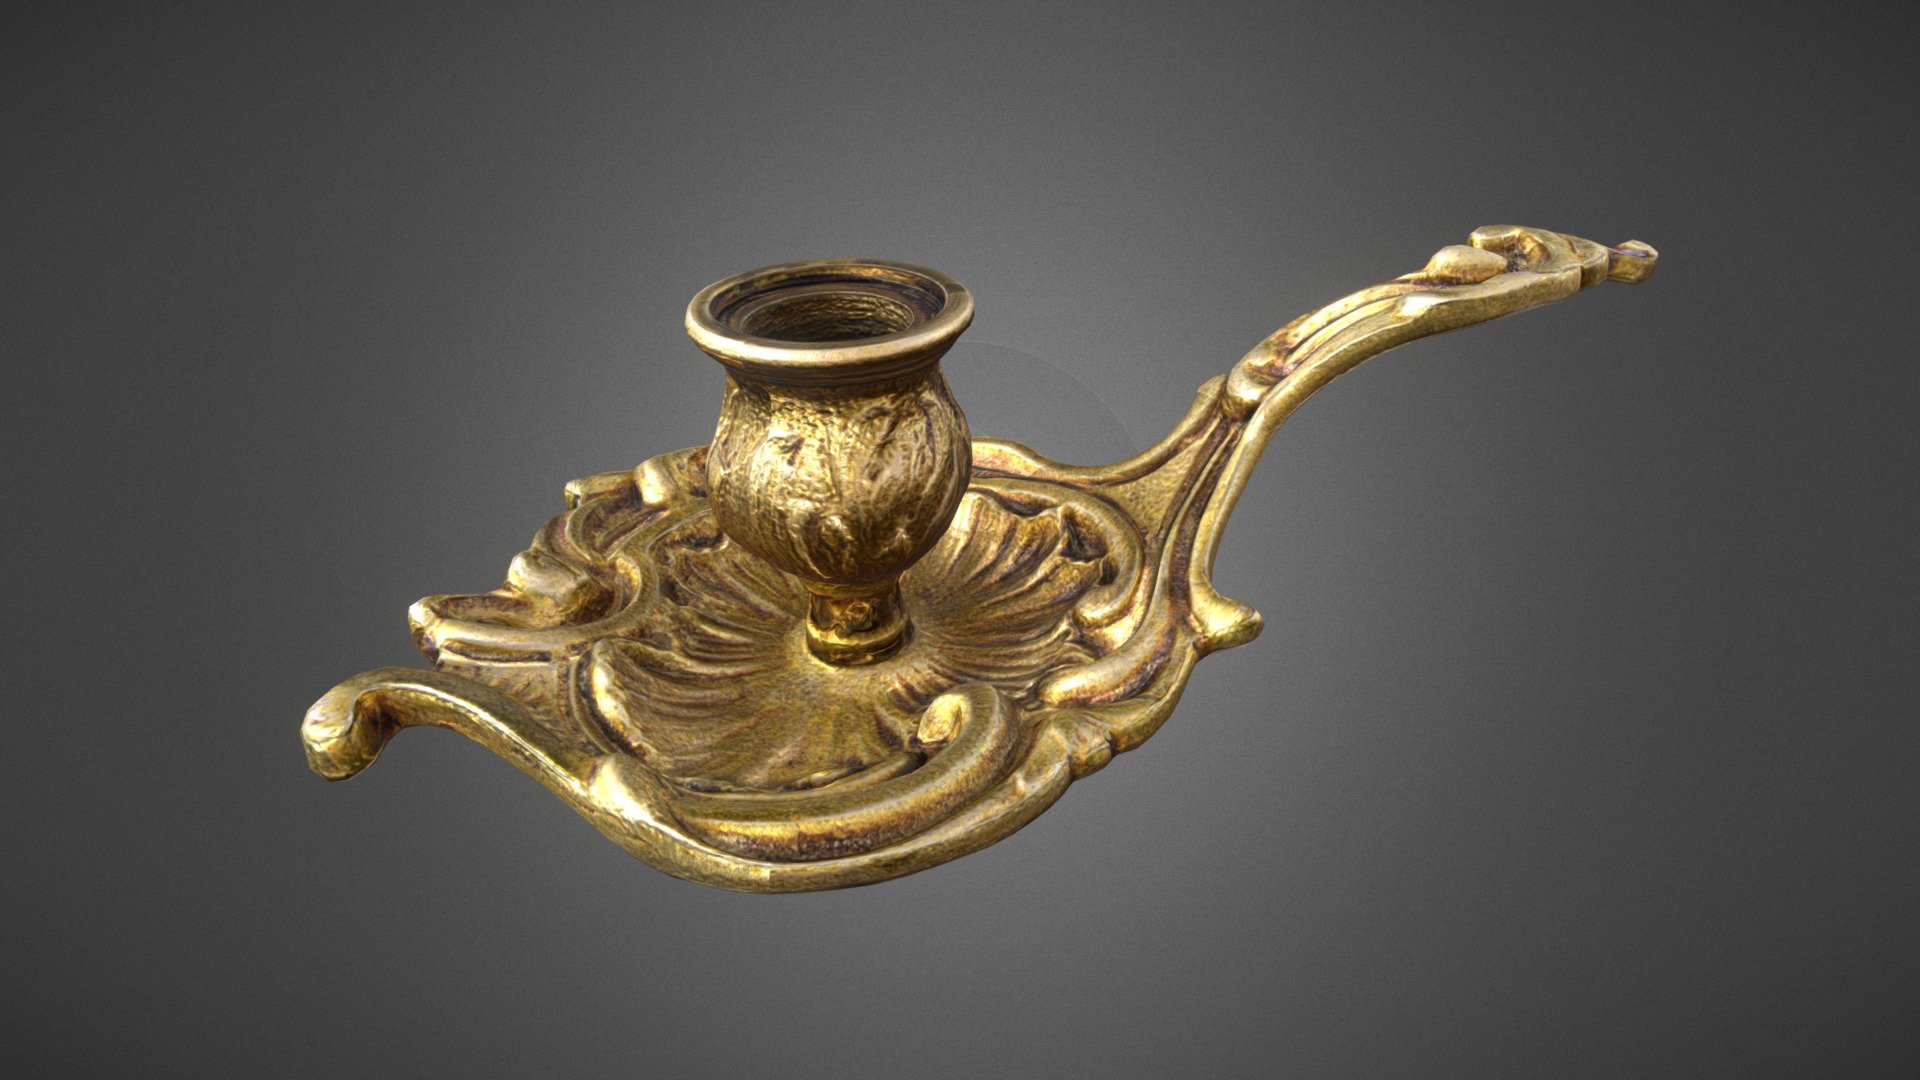 Rococo style bronze candlestick made in photogrammetry with Agisoft Metashape.
318 pictures have takes to made this object.
Small retopology on Zbrush and texturing with Substance Painter 3d model